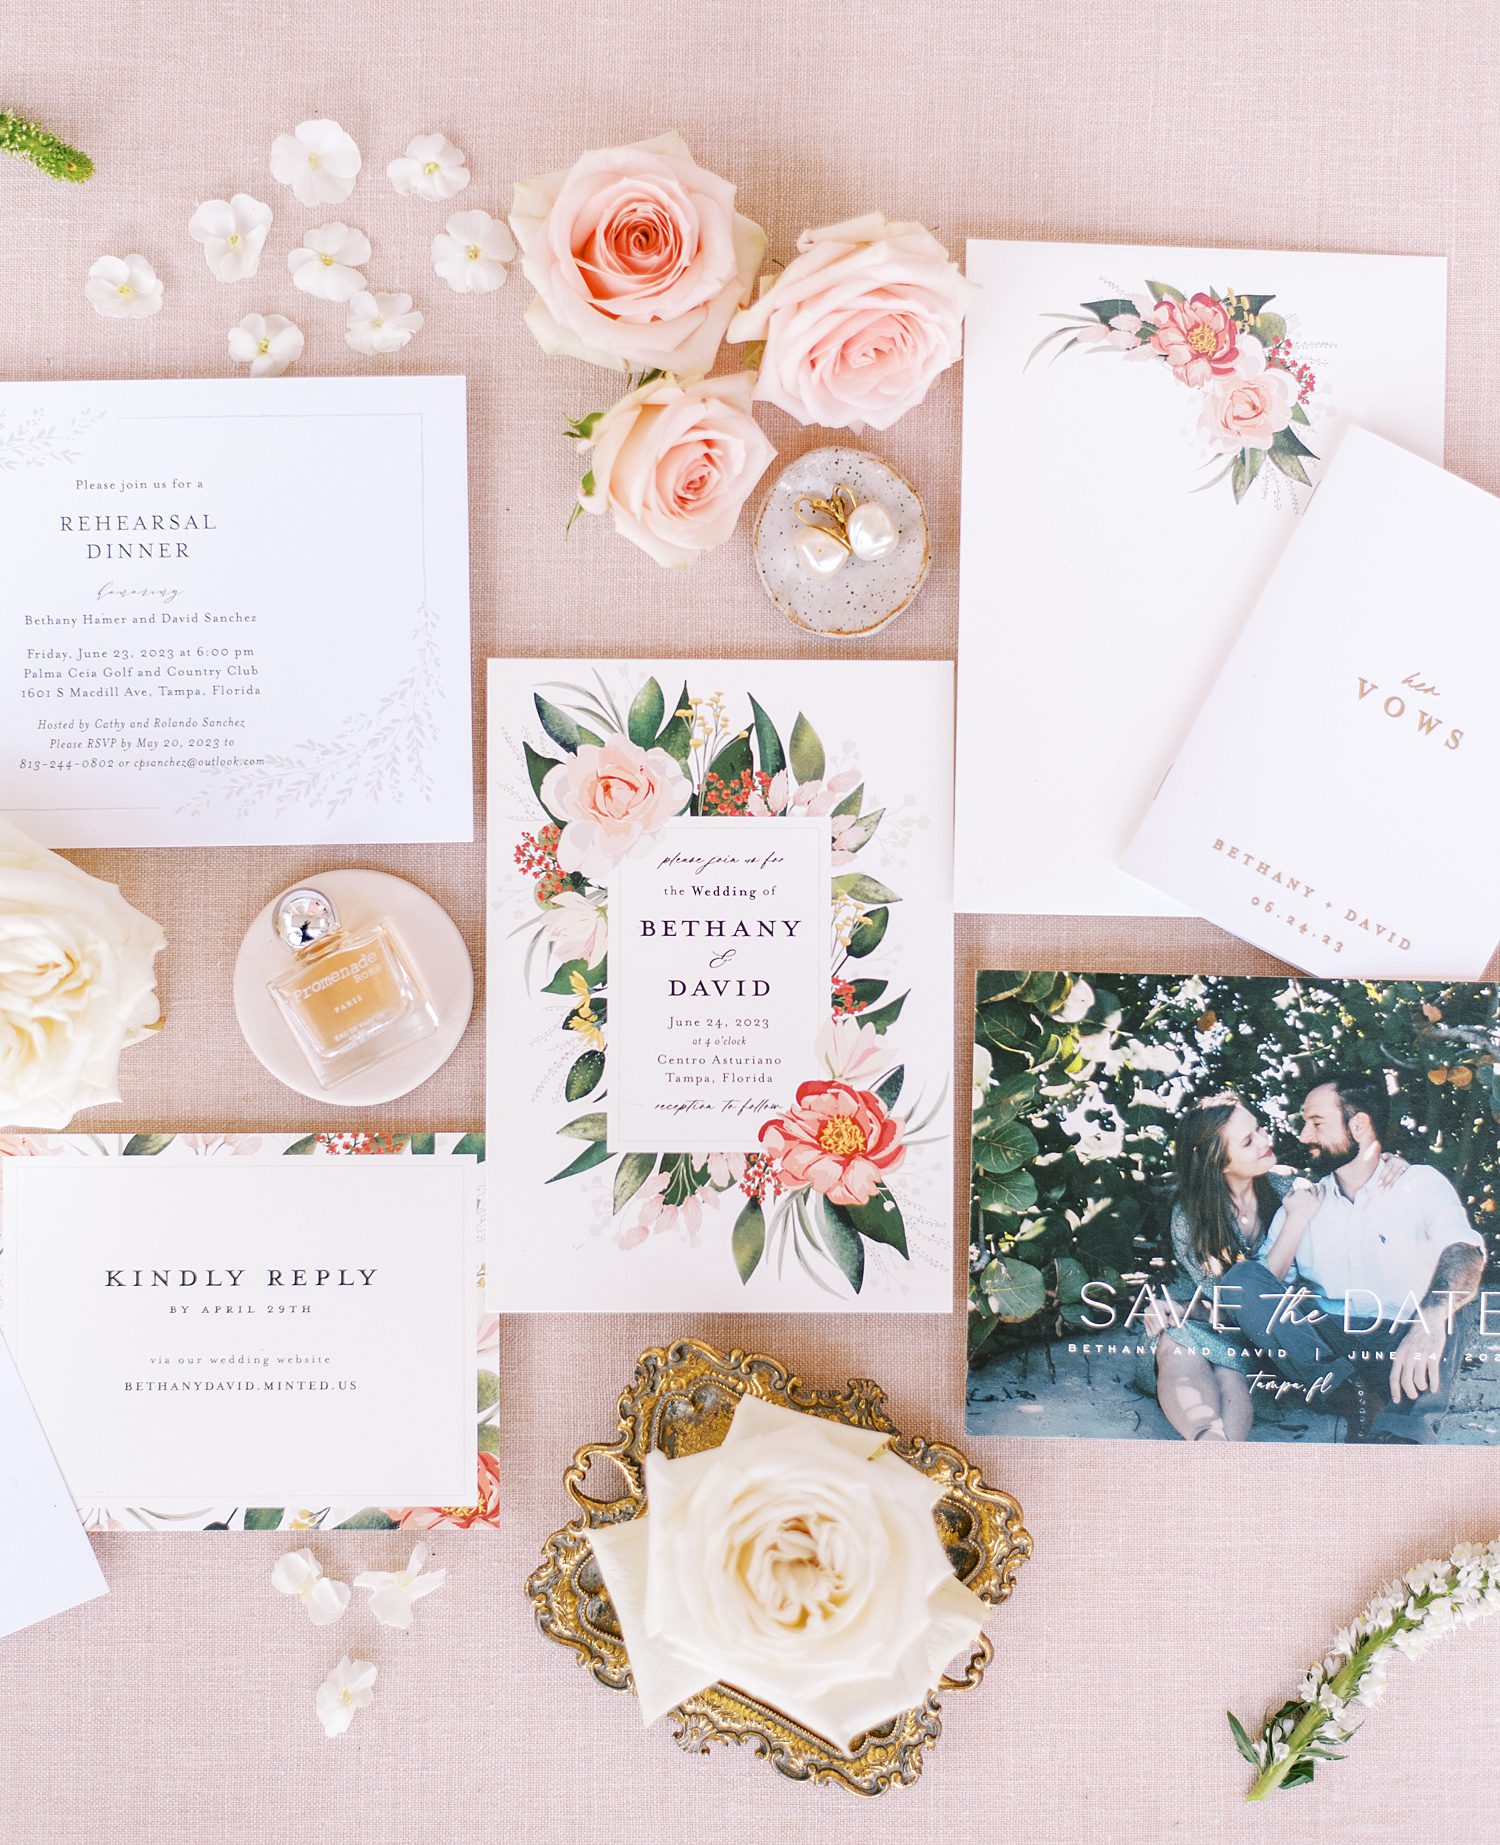 stationery set and save the date for Tampa wedding